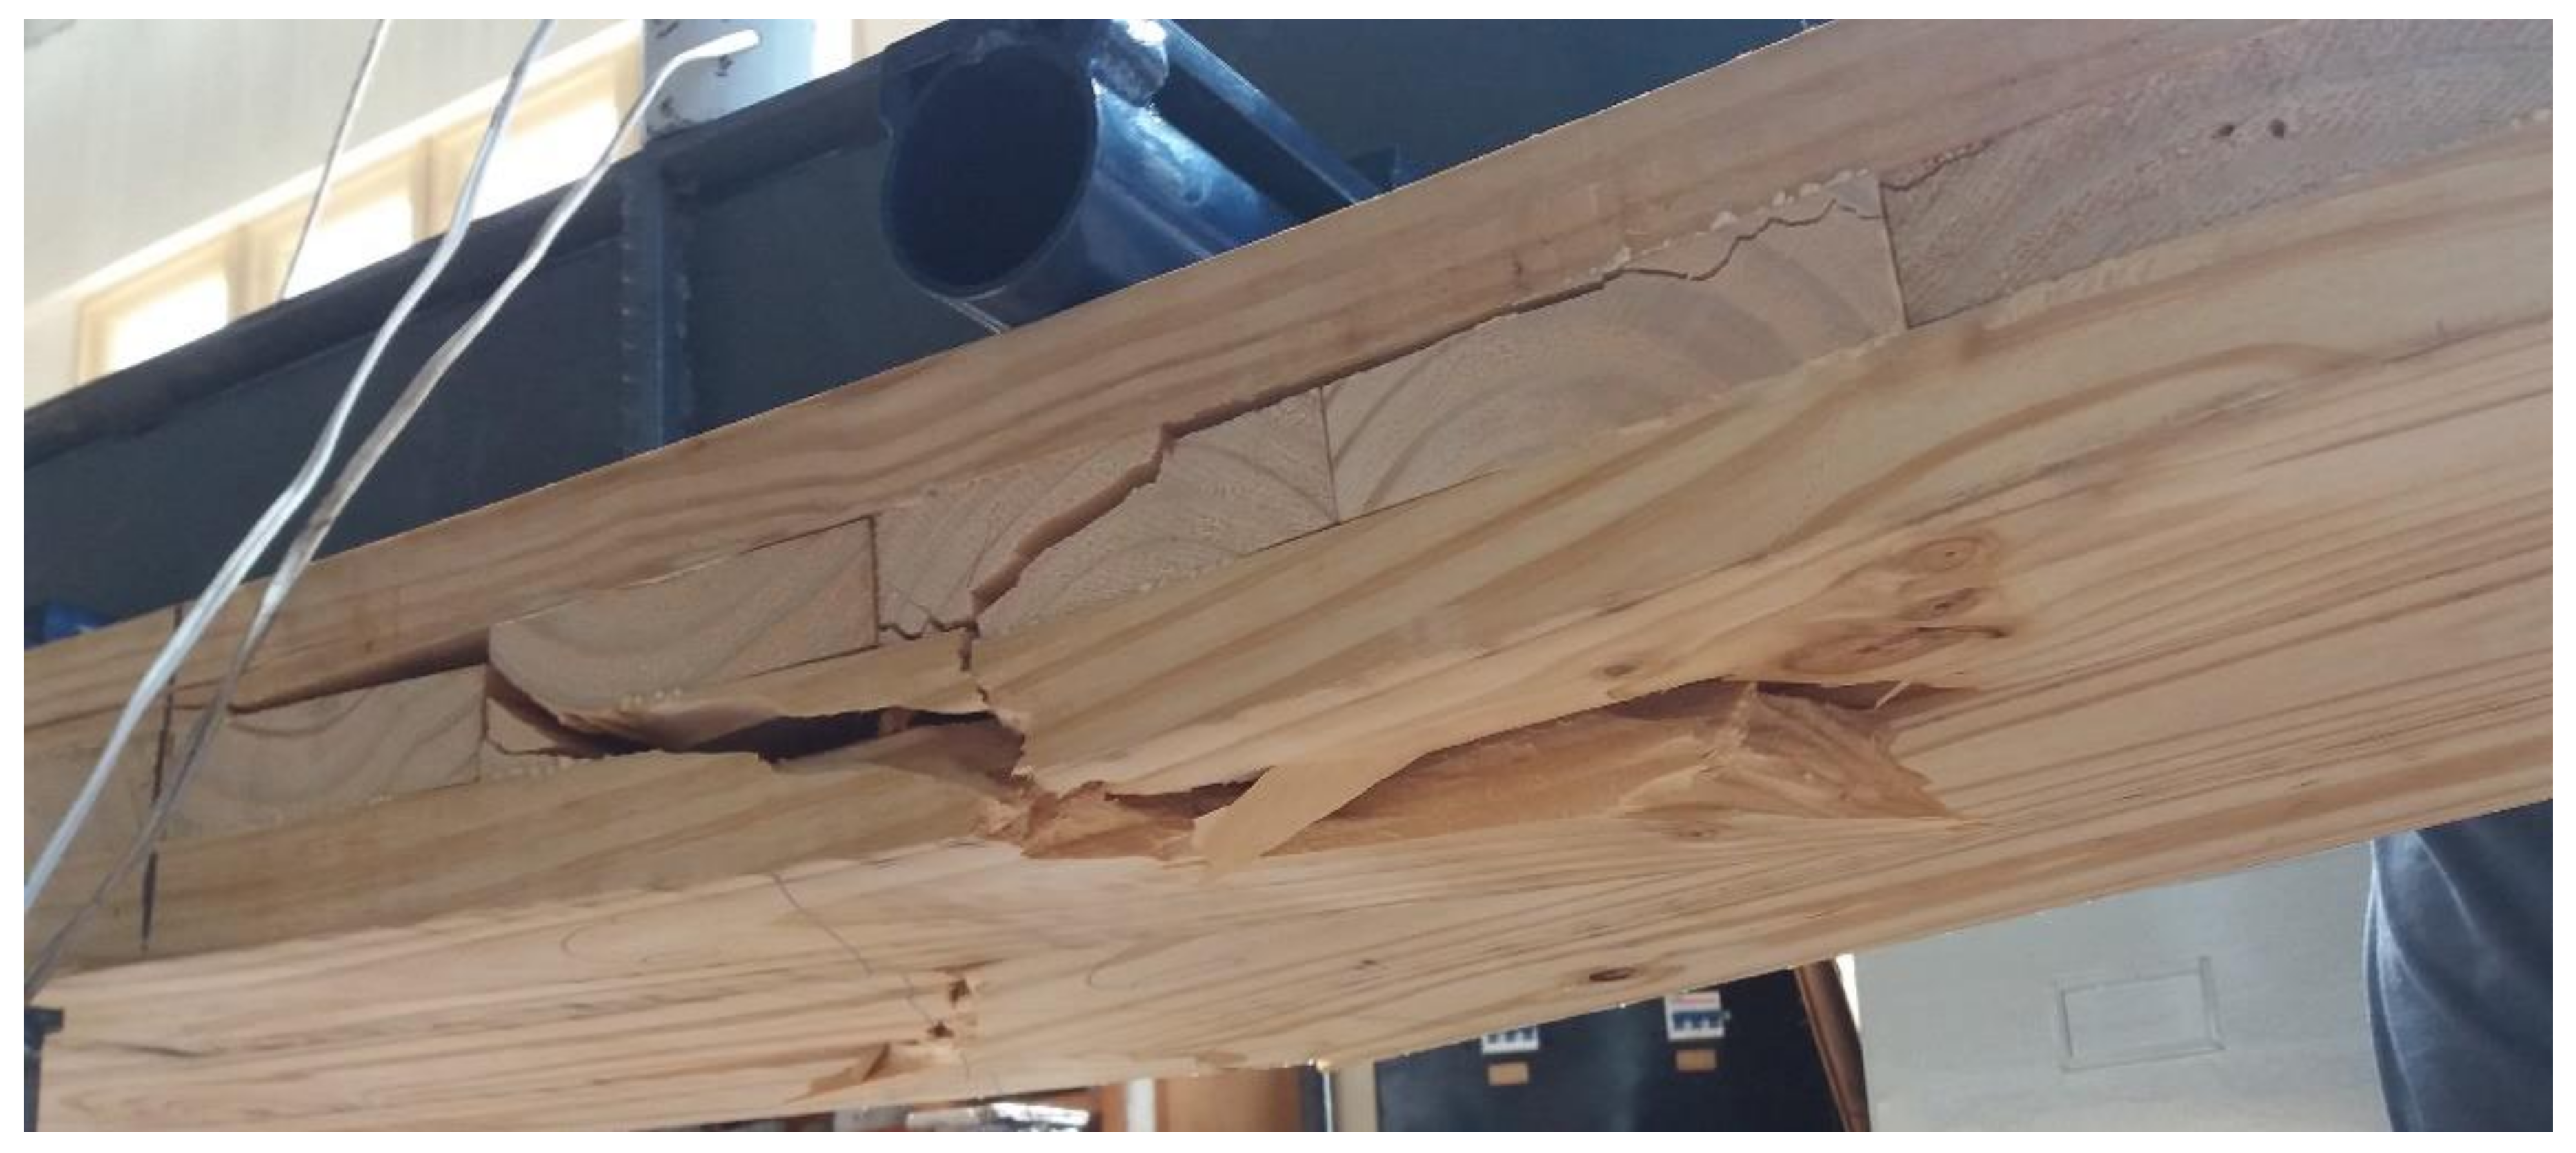 Materials | Free Full-Text | Characterization and Structural Performance in  Bending of CLT Panels Made from Small-Diameter Logs of Loblolly/Slash Pine  | HTML